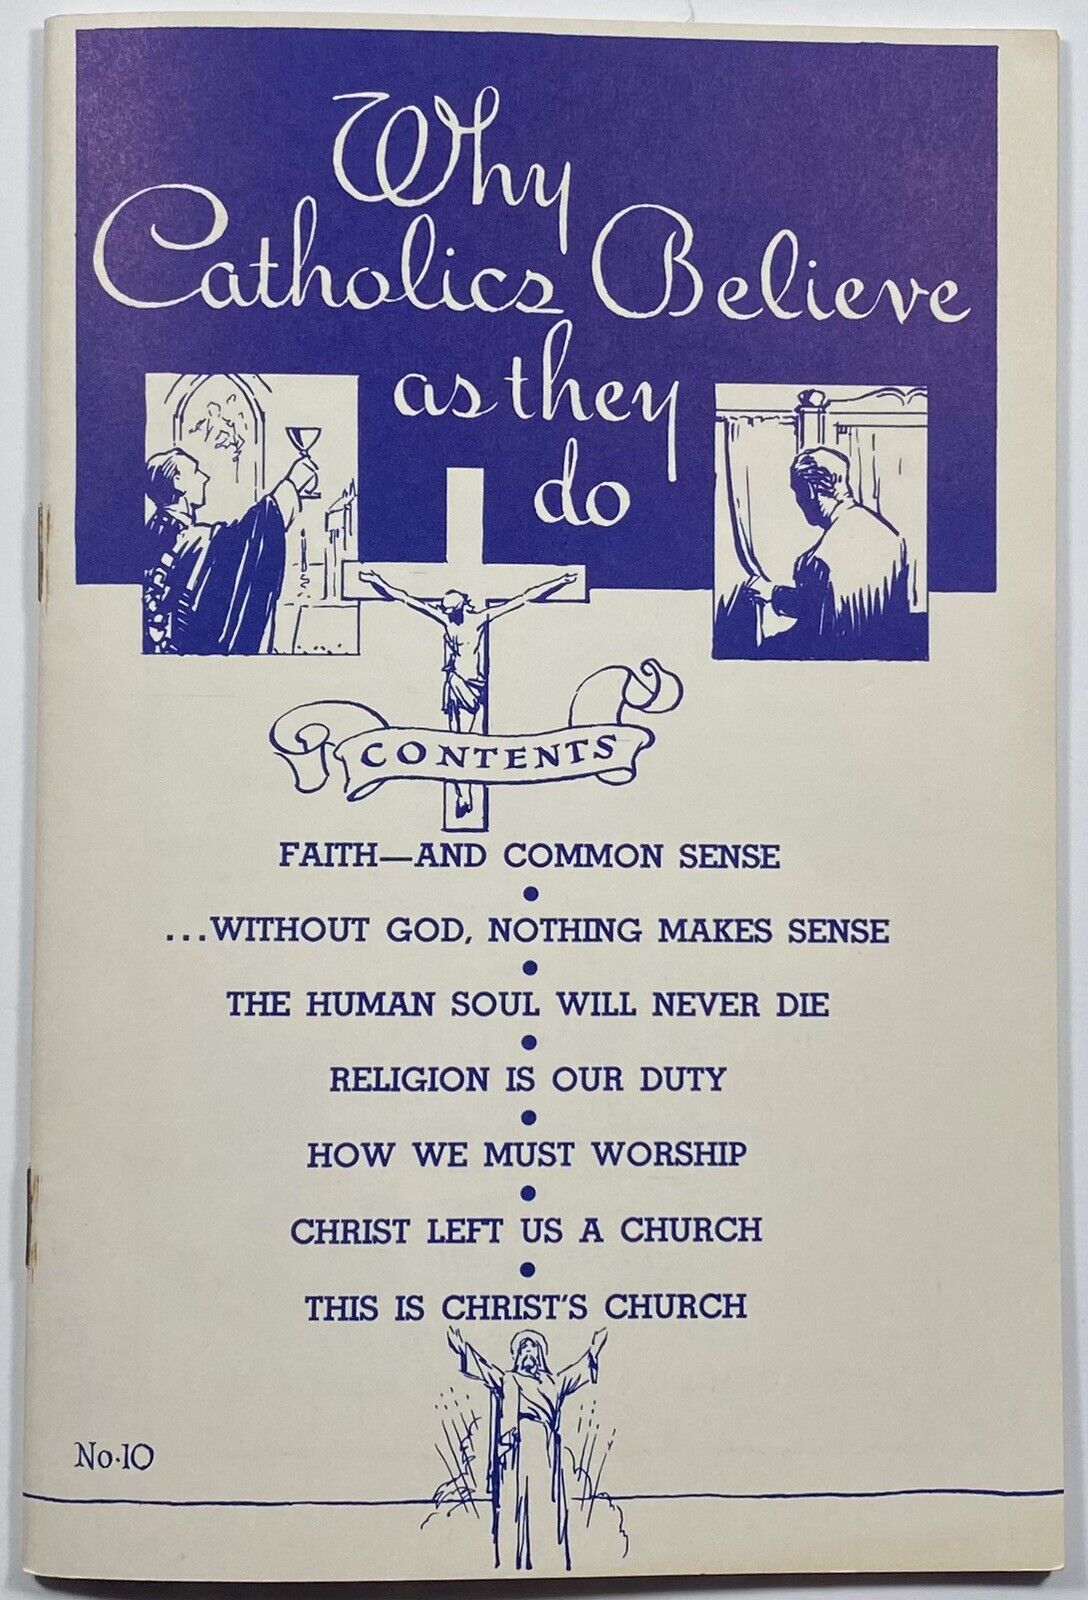 Why Catholics Believe as they do, Vintage 1955 Holy Devotional Booklet.